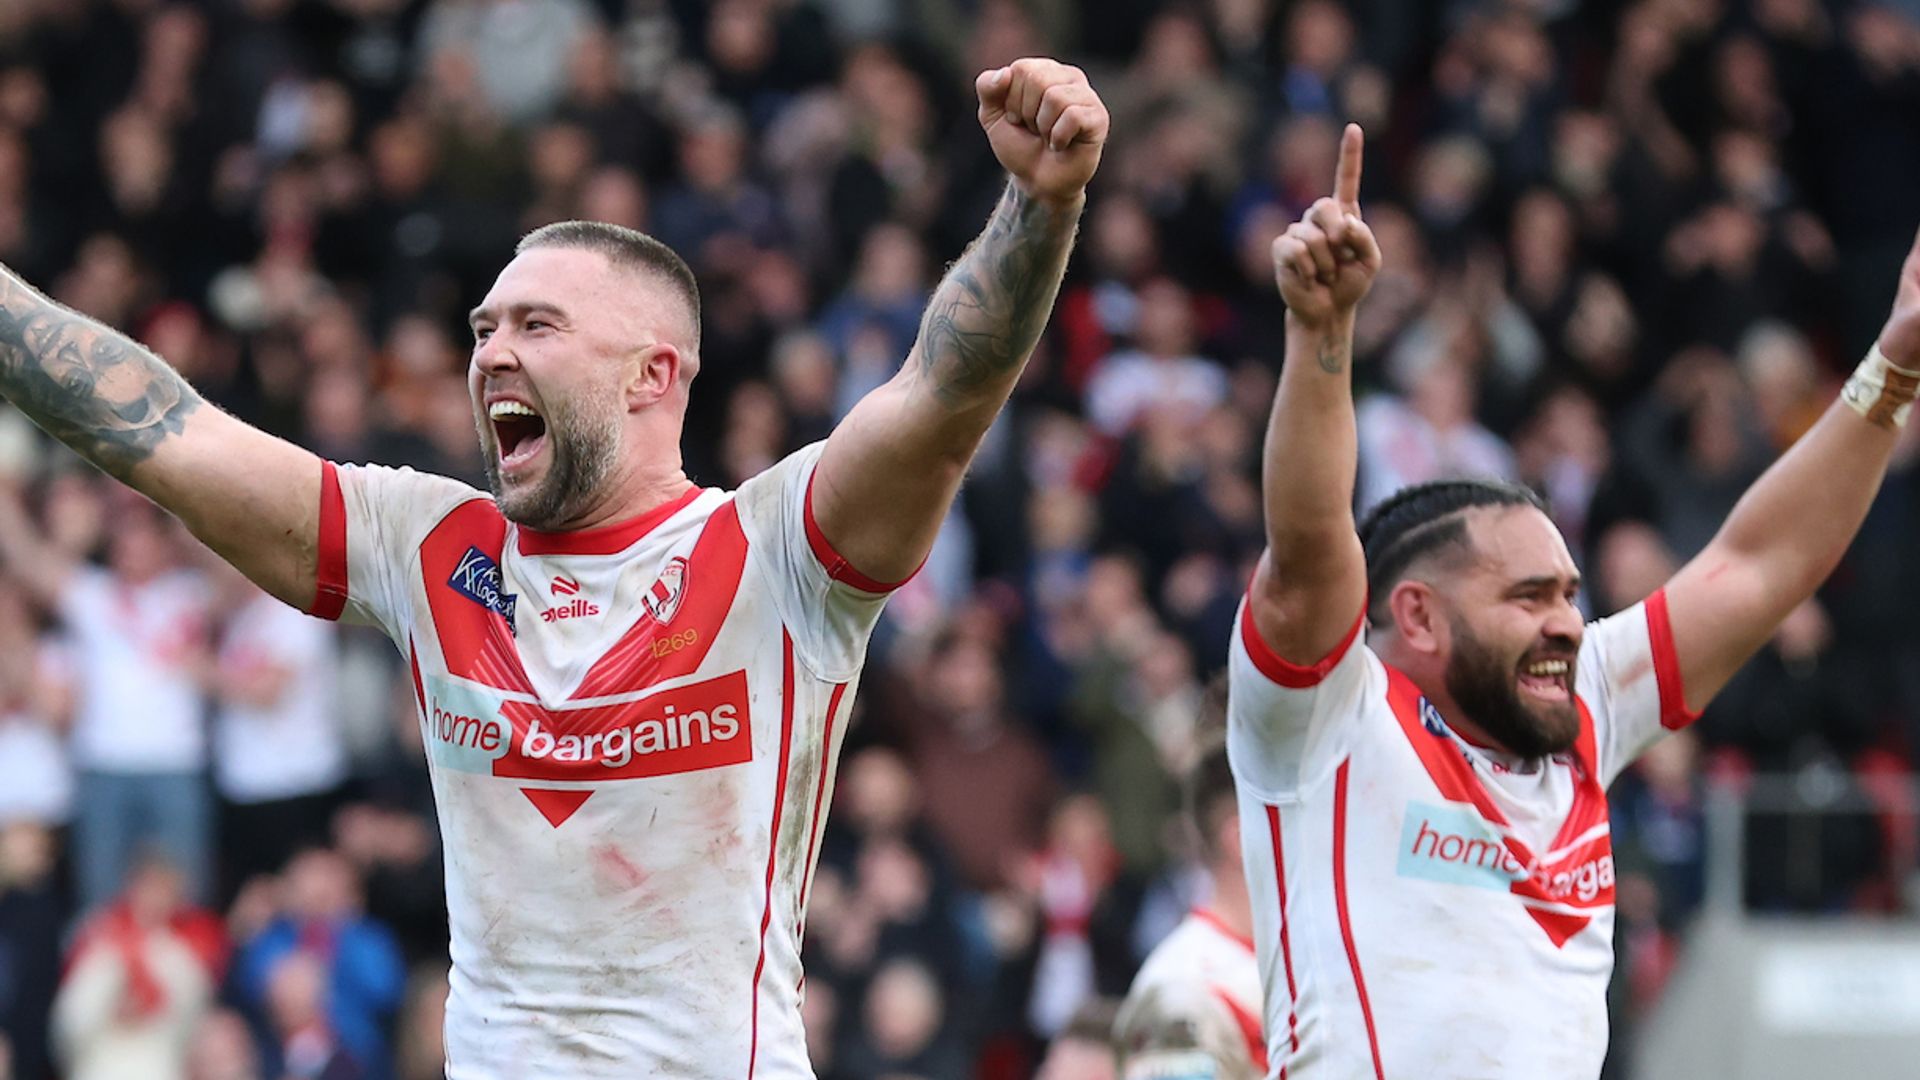 Saints take spoils against 12-player Wigan in drama-filled derby